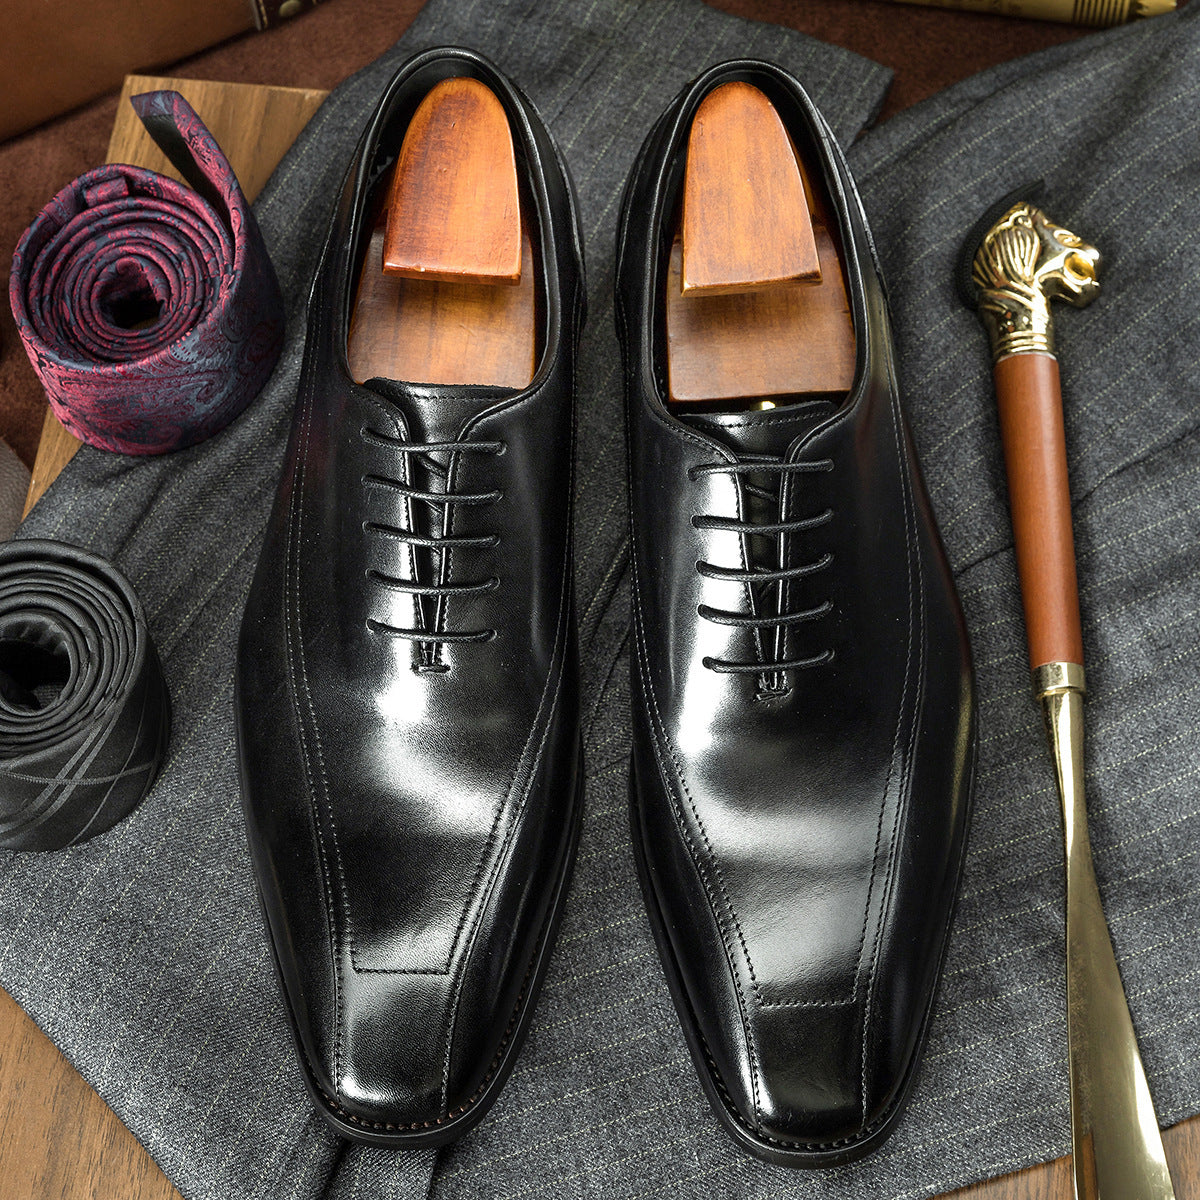 Leather Oxford Shoes Men's Shoes FREE DELIVERY 4-9 DAYS